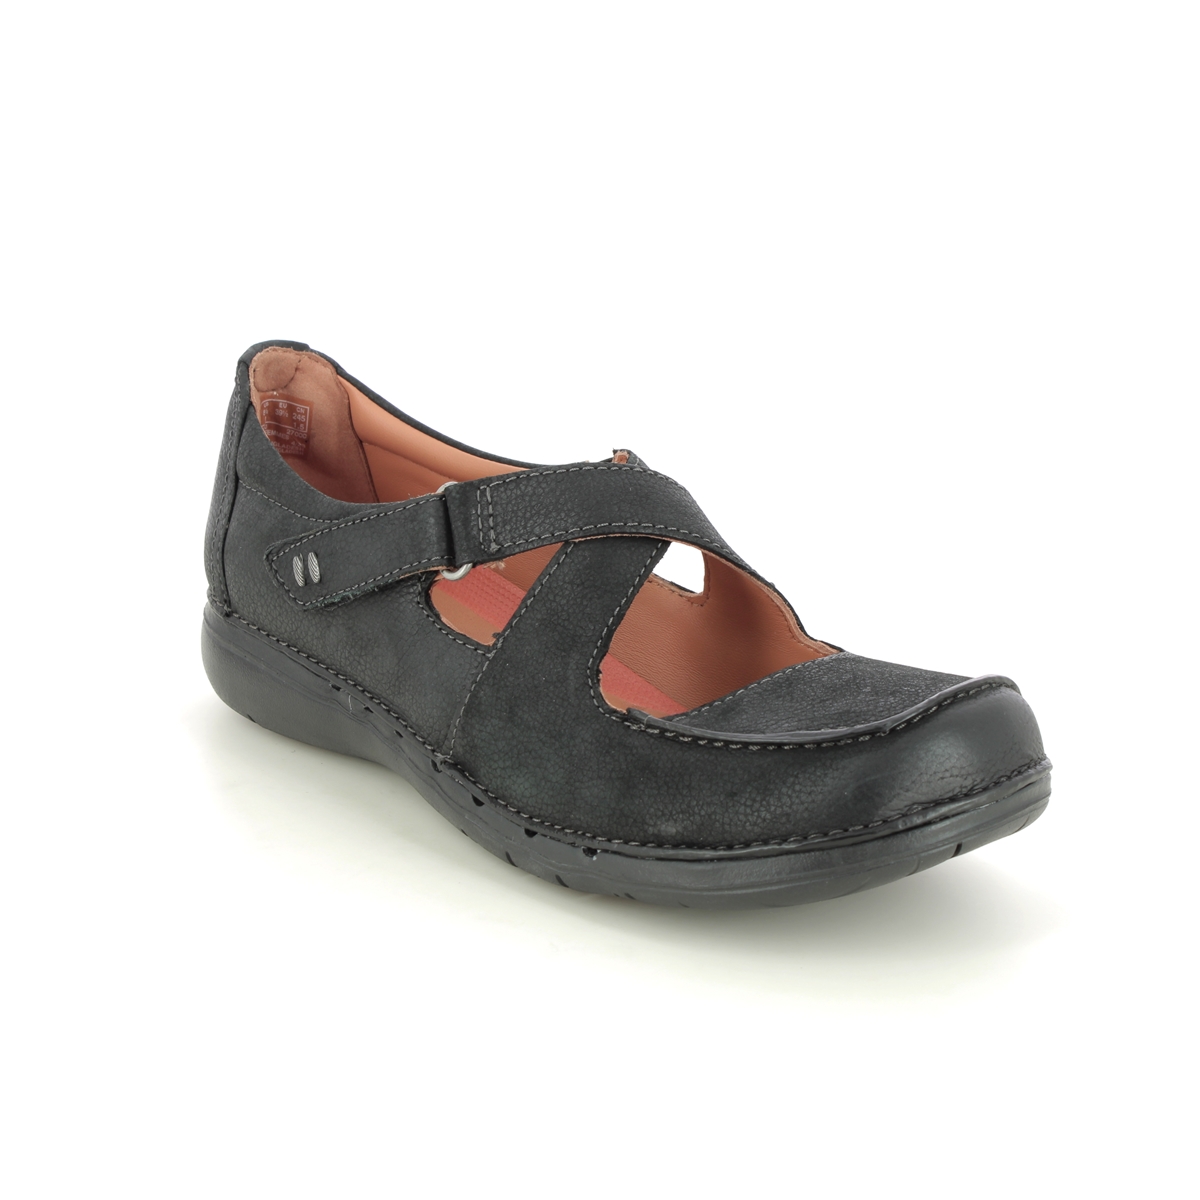 Clarks Un Loop Strap Black Leather Womens Mary Jane Shoes 749704D In Size 6 In Plain Black Leather